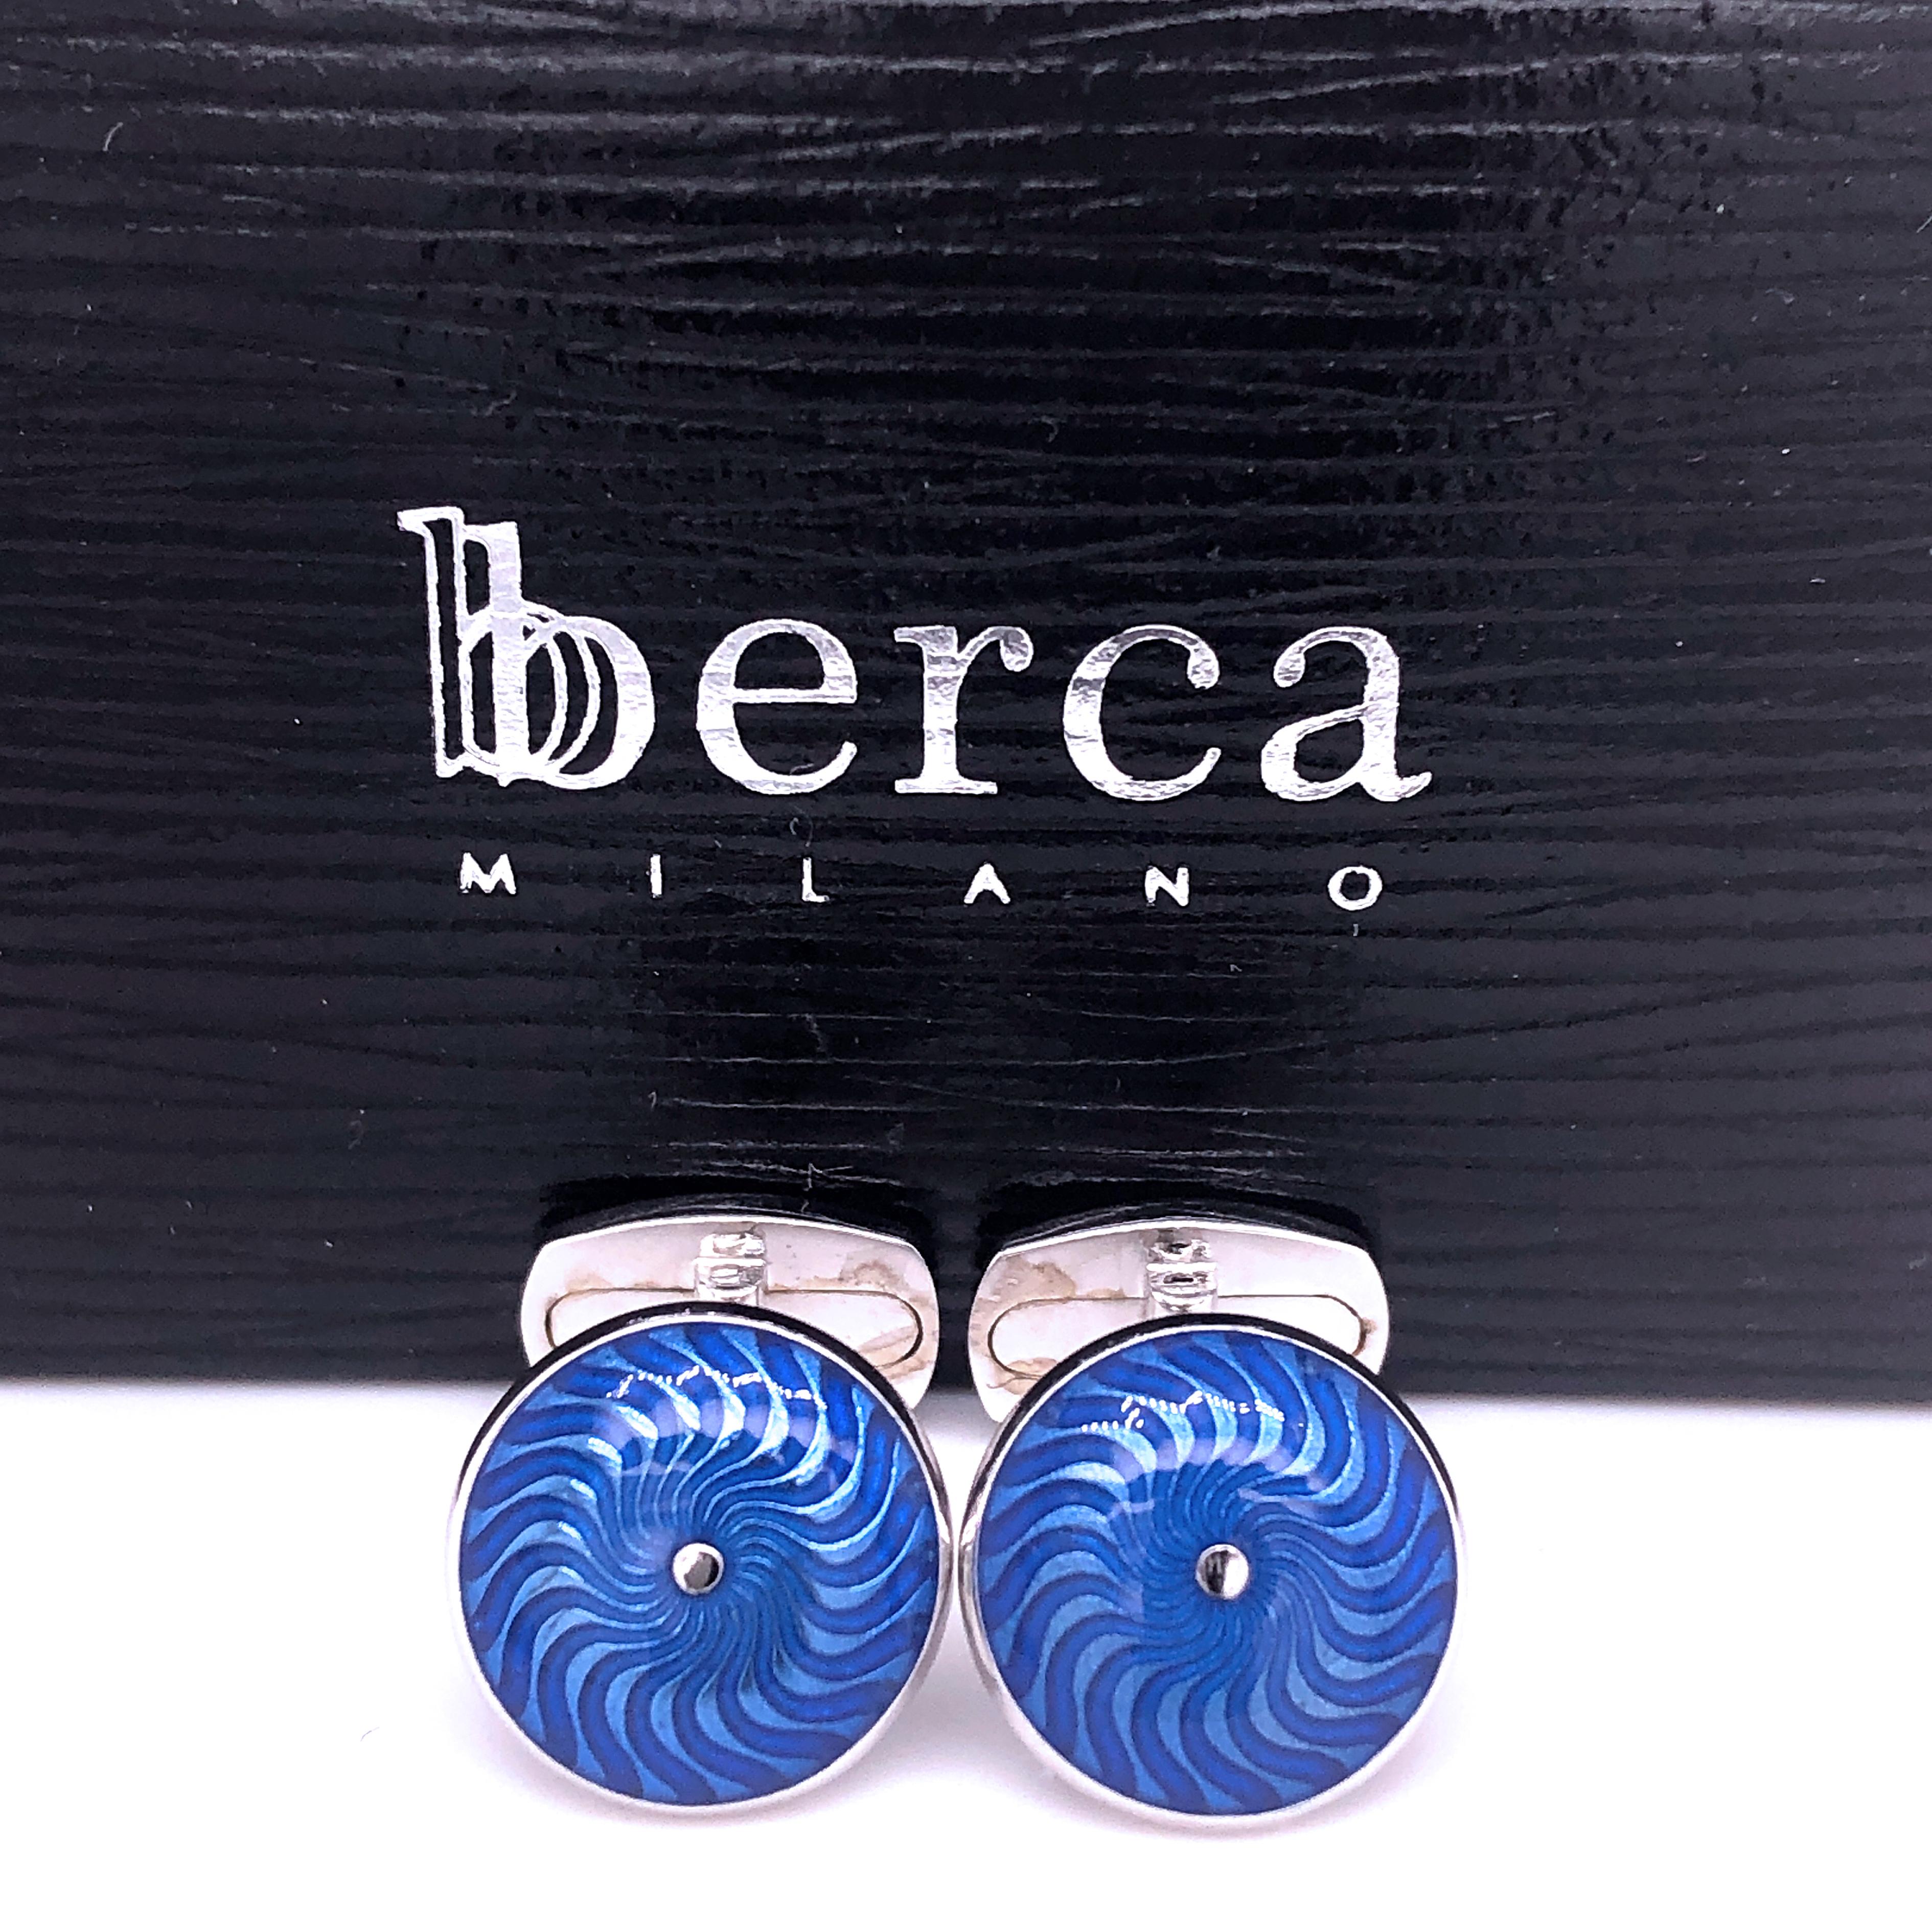 Unique, absolutely Chic yet Timeless Navy Blue Guilloché Hand Enamelled Round Cabochon Shaped Sterling Silver Setting Cufflinks.
In our fitted Black Box and Pouch.